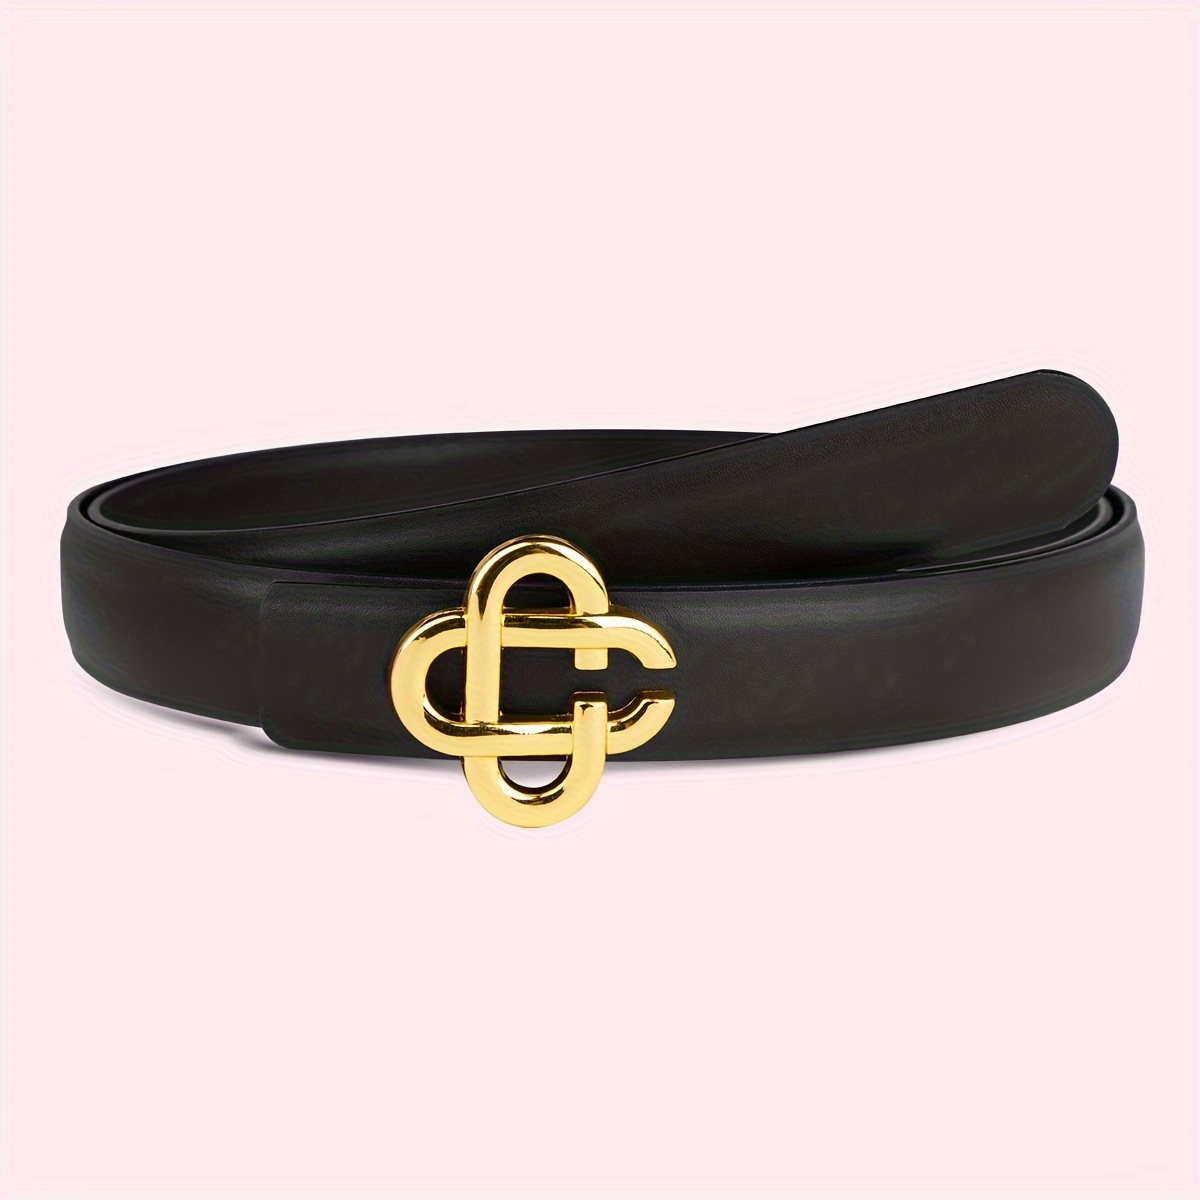 Golden Chinese Knot Buckle Belts Trendy Candy Color Leather